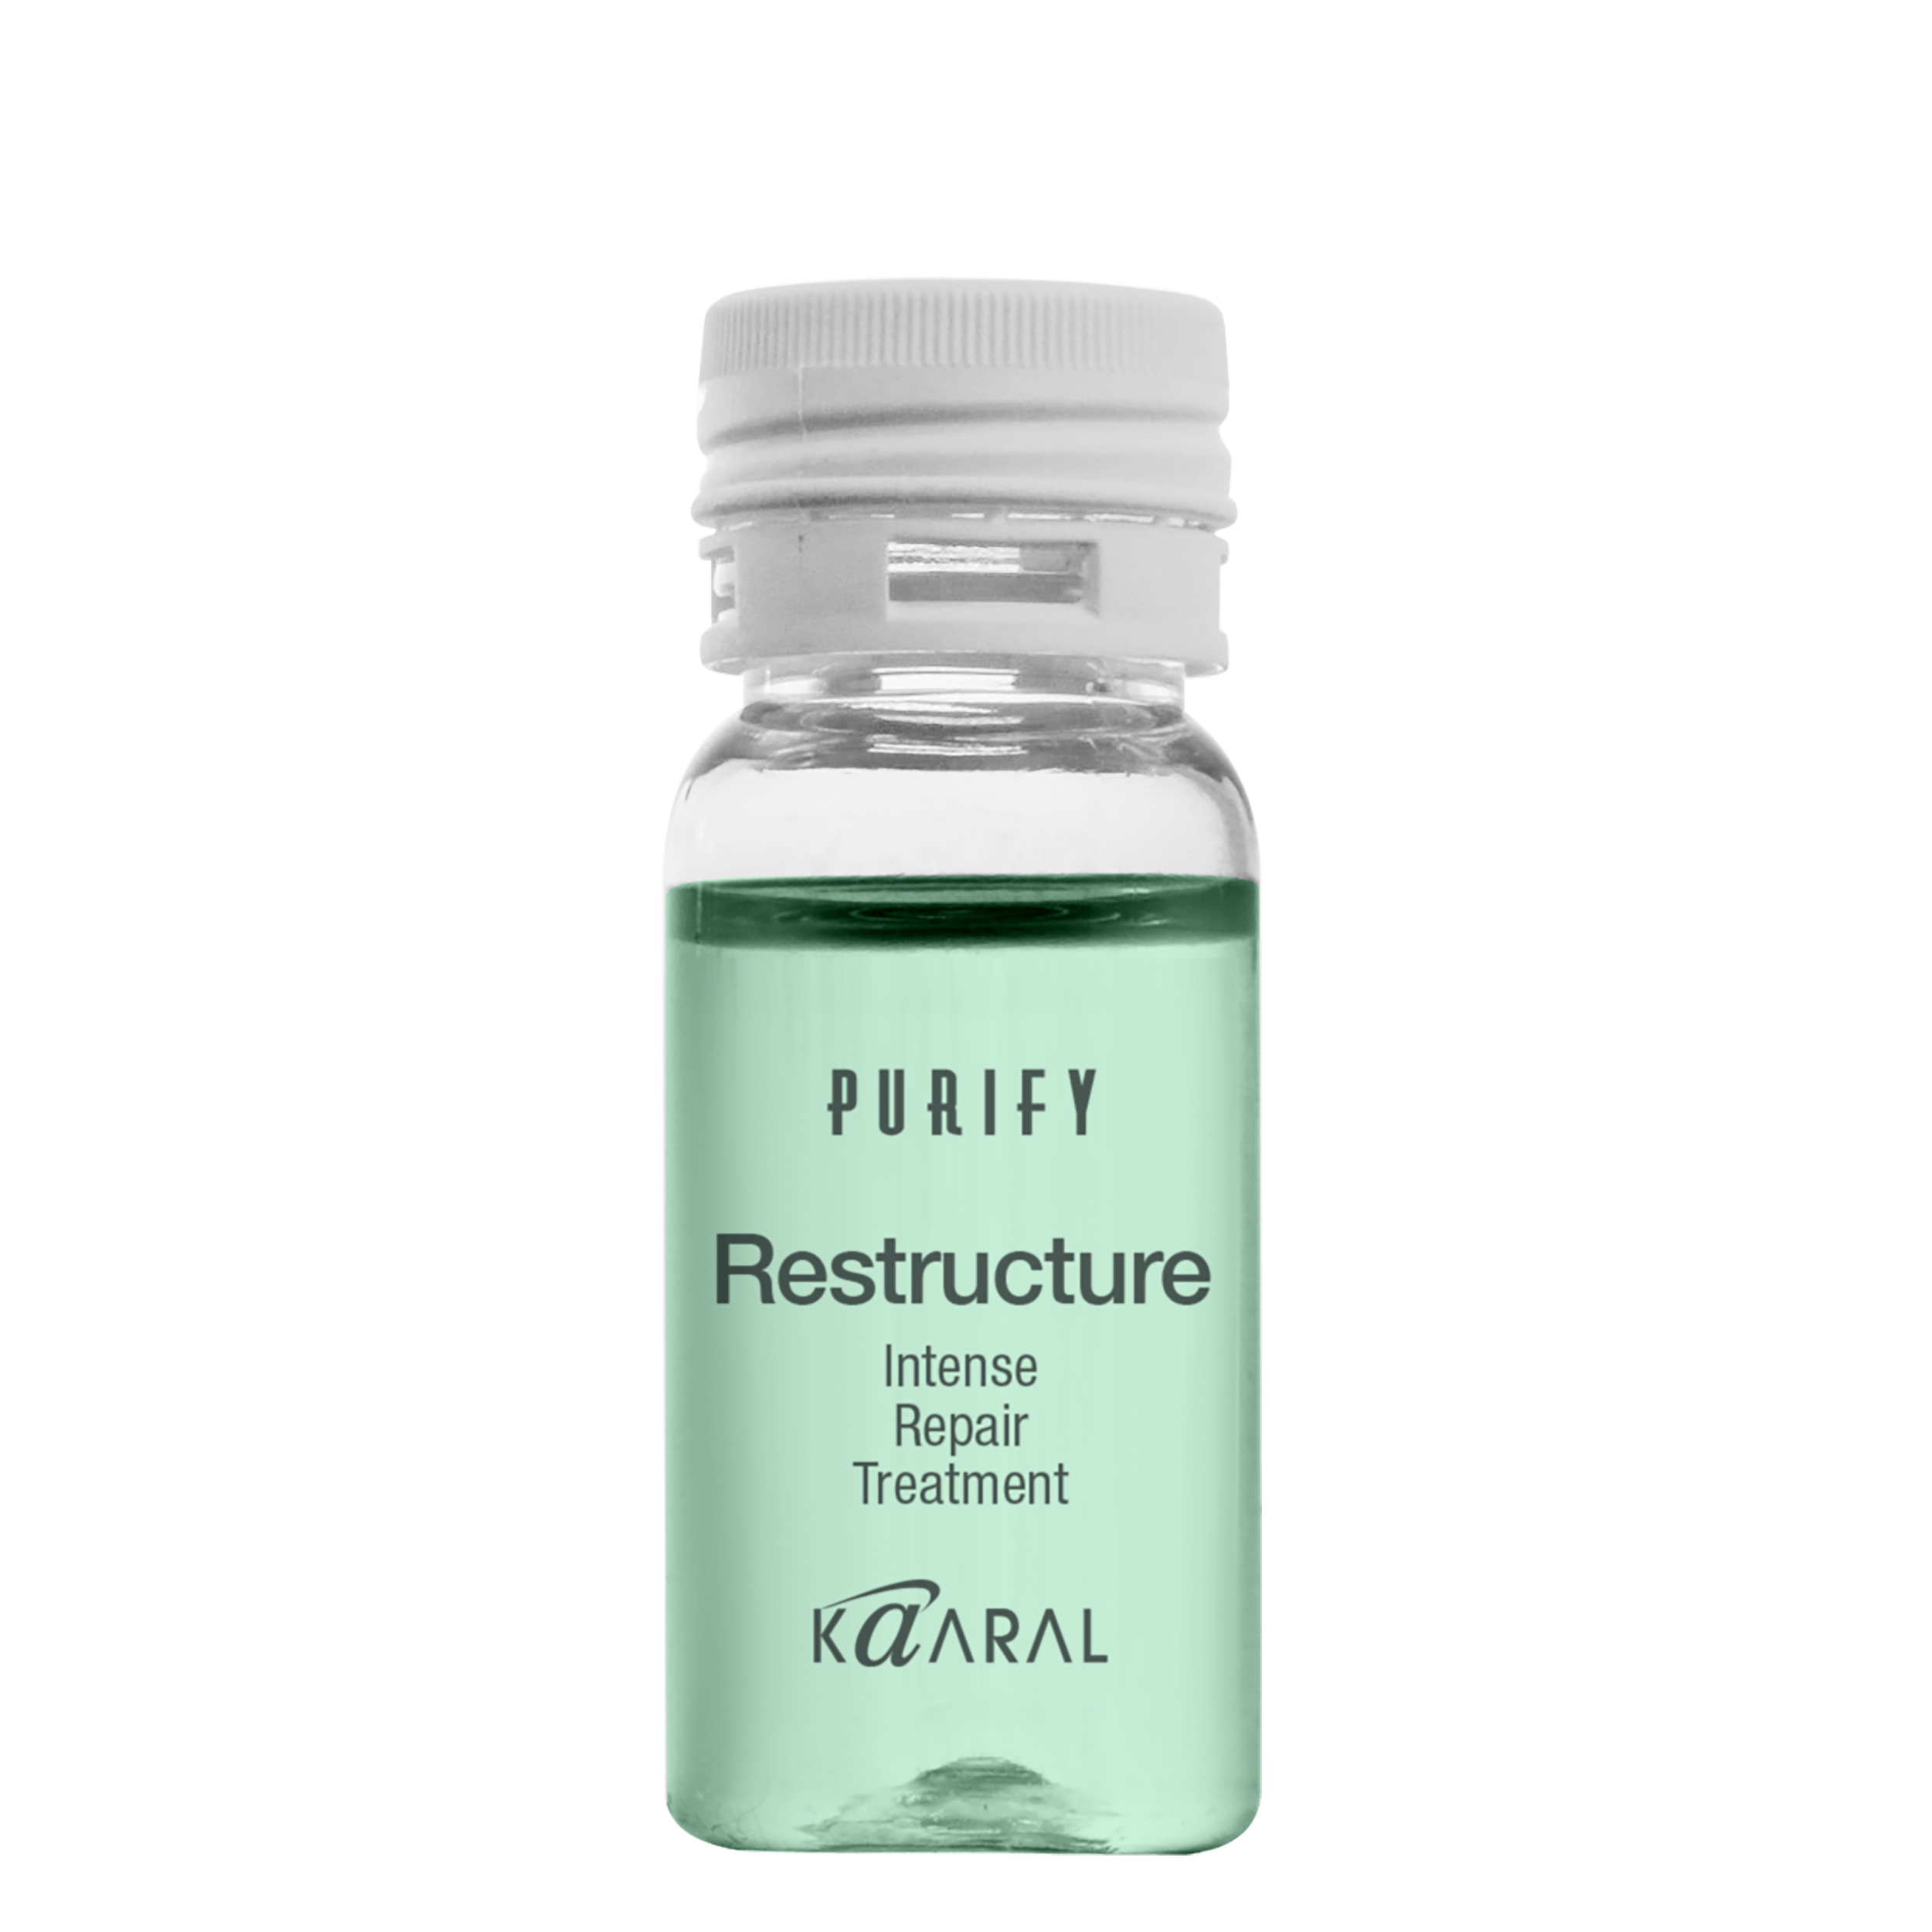 Kaaral - Purify RESTRUCTURE Treatment - Creata Beauty - Professional Beauty Products